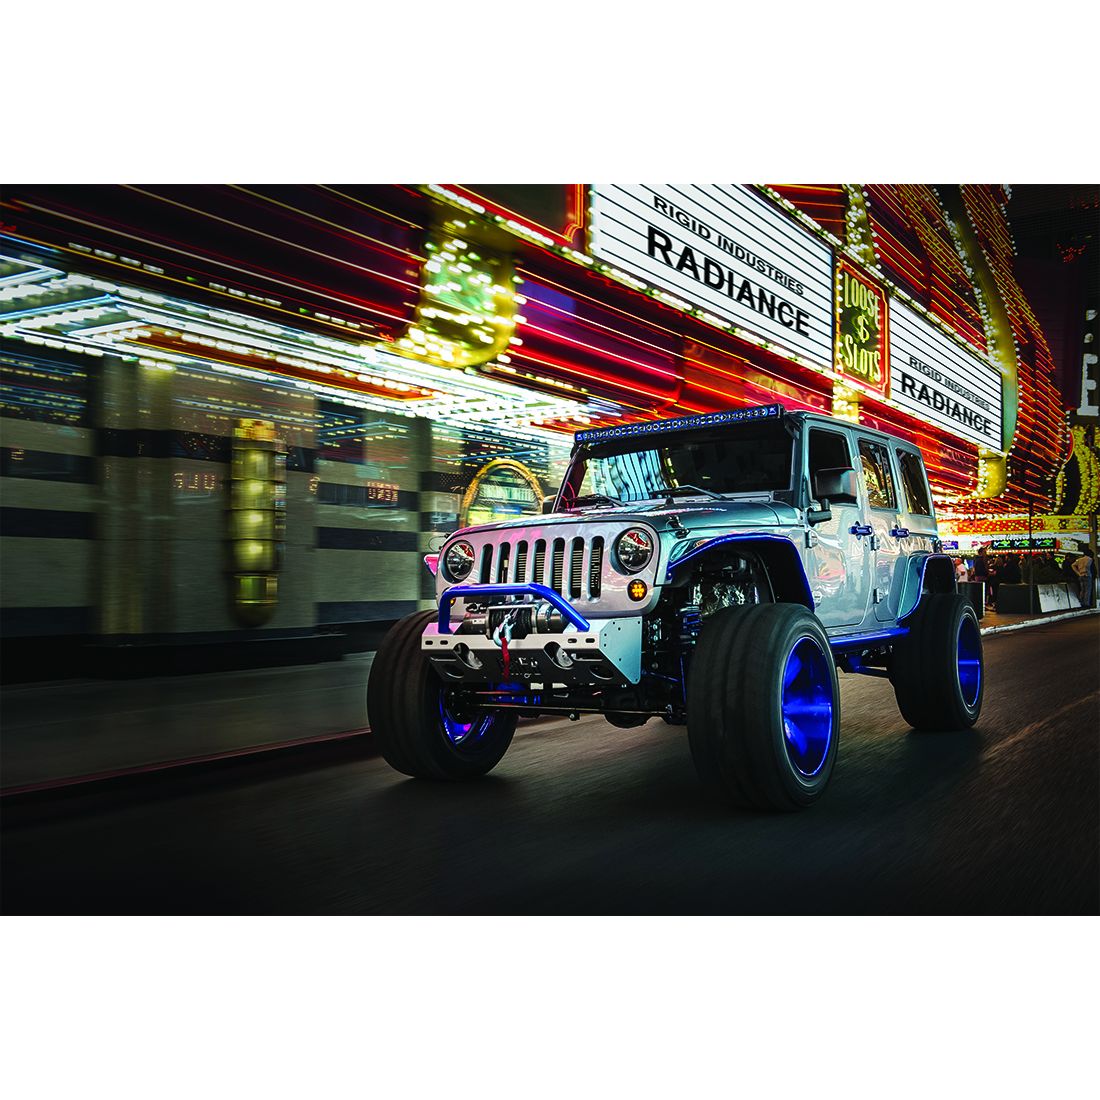 Rigid Industries 30 Inch Red Backlight Radiance Plus - Click Image to Close